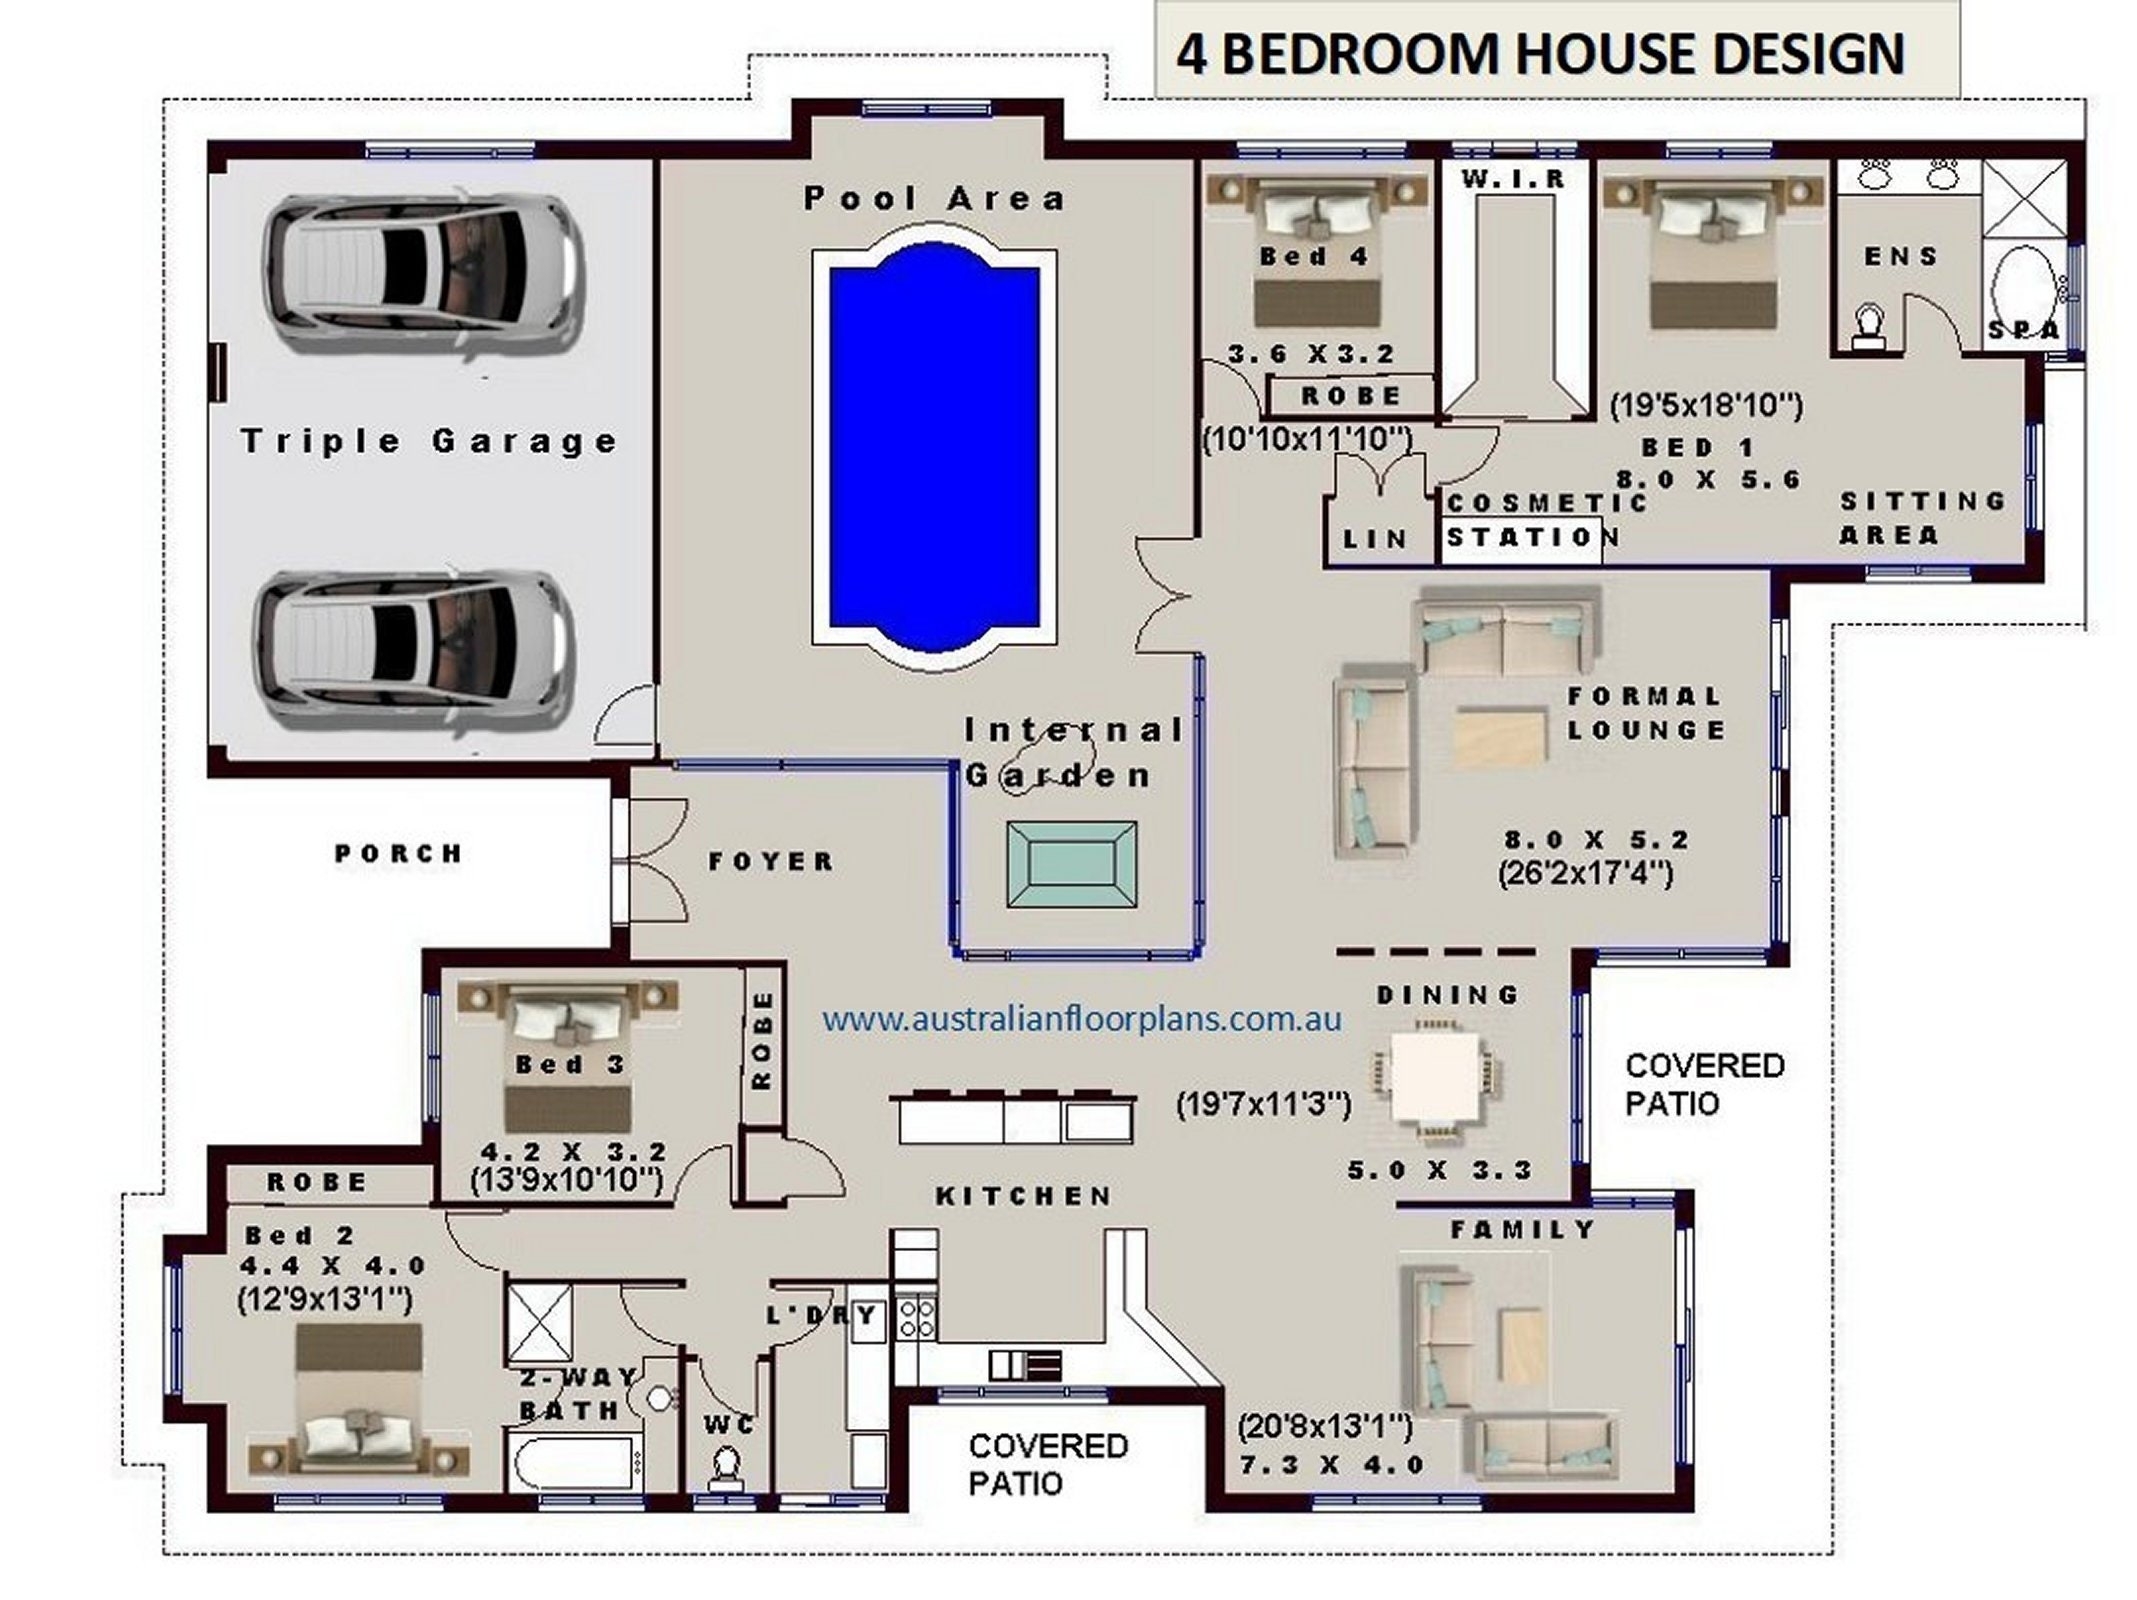 Awesome internal pool 4 bedroom house plans full concept plans for etsy within good house plans 4 bed rooms